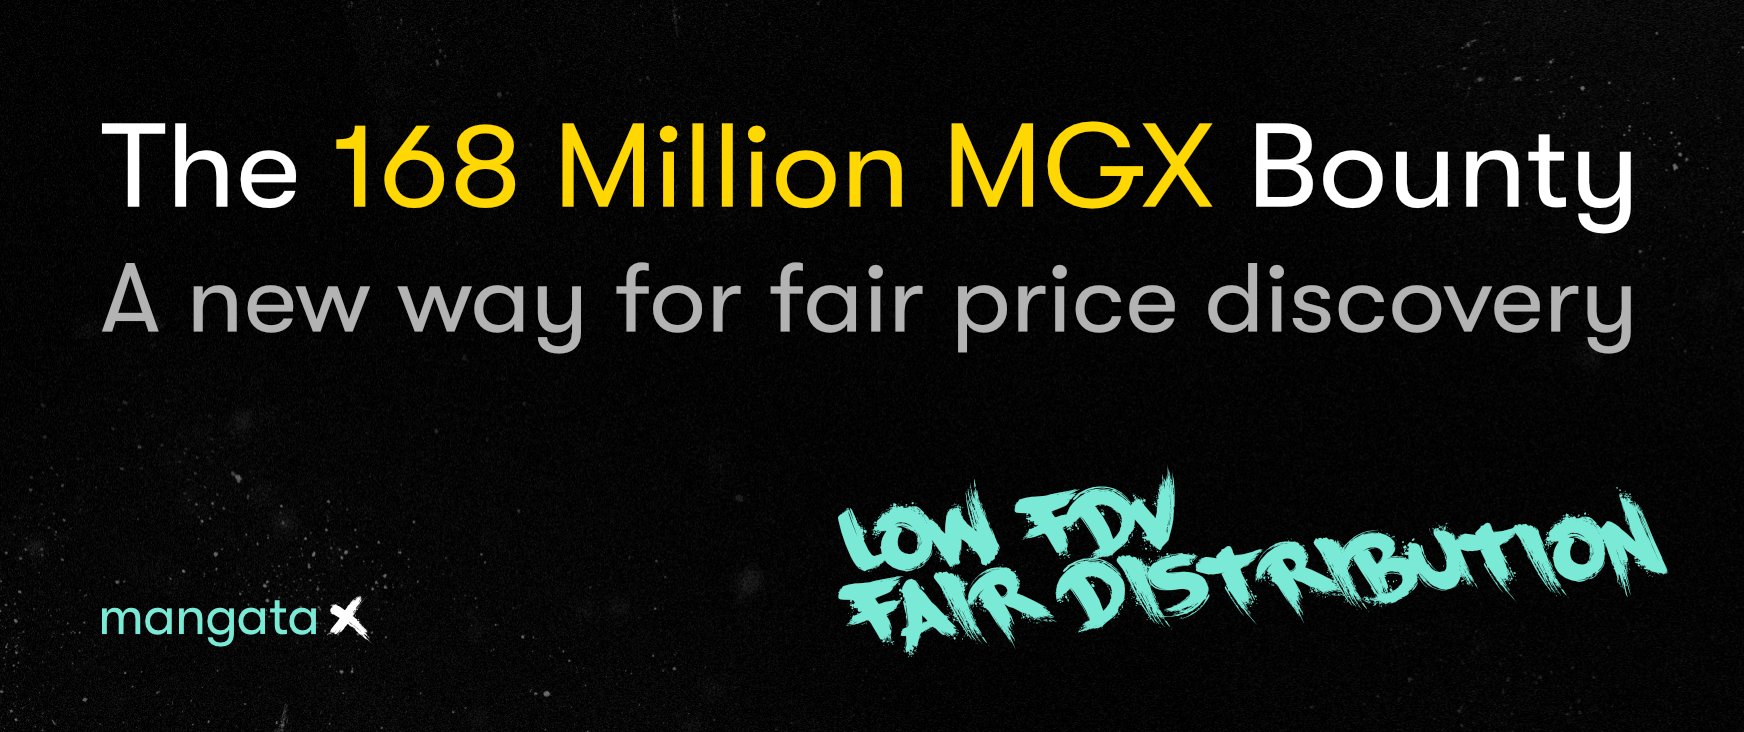 The 168 Million MGX Bounty - A New Way to Look at Fair Price Discovery